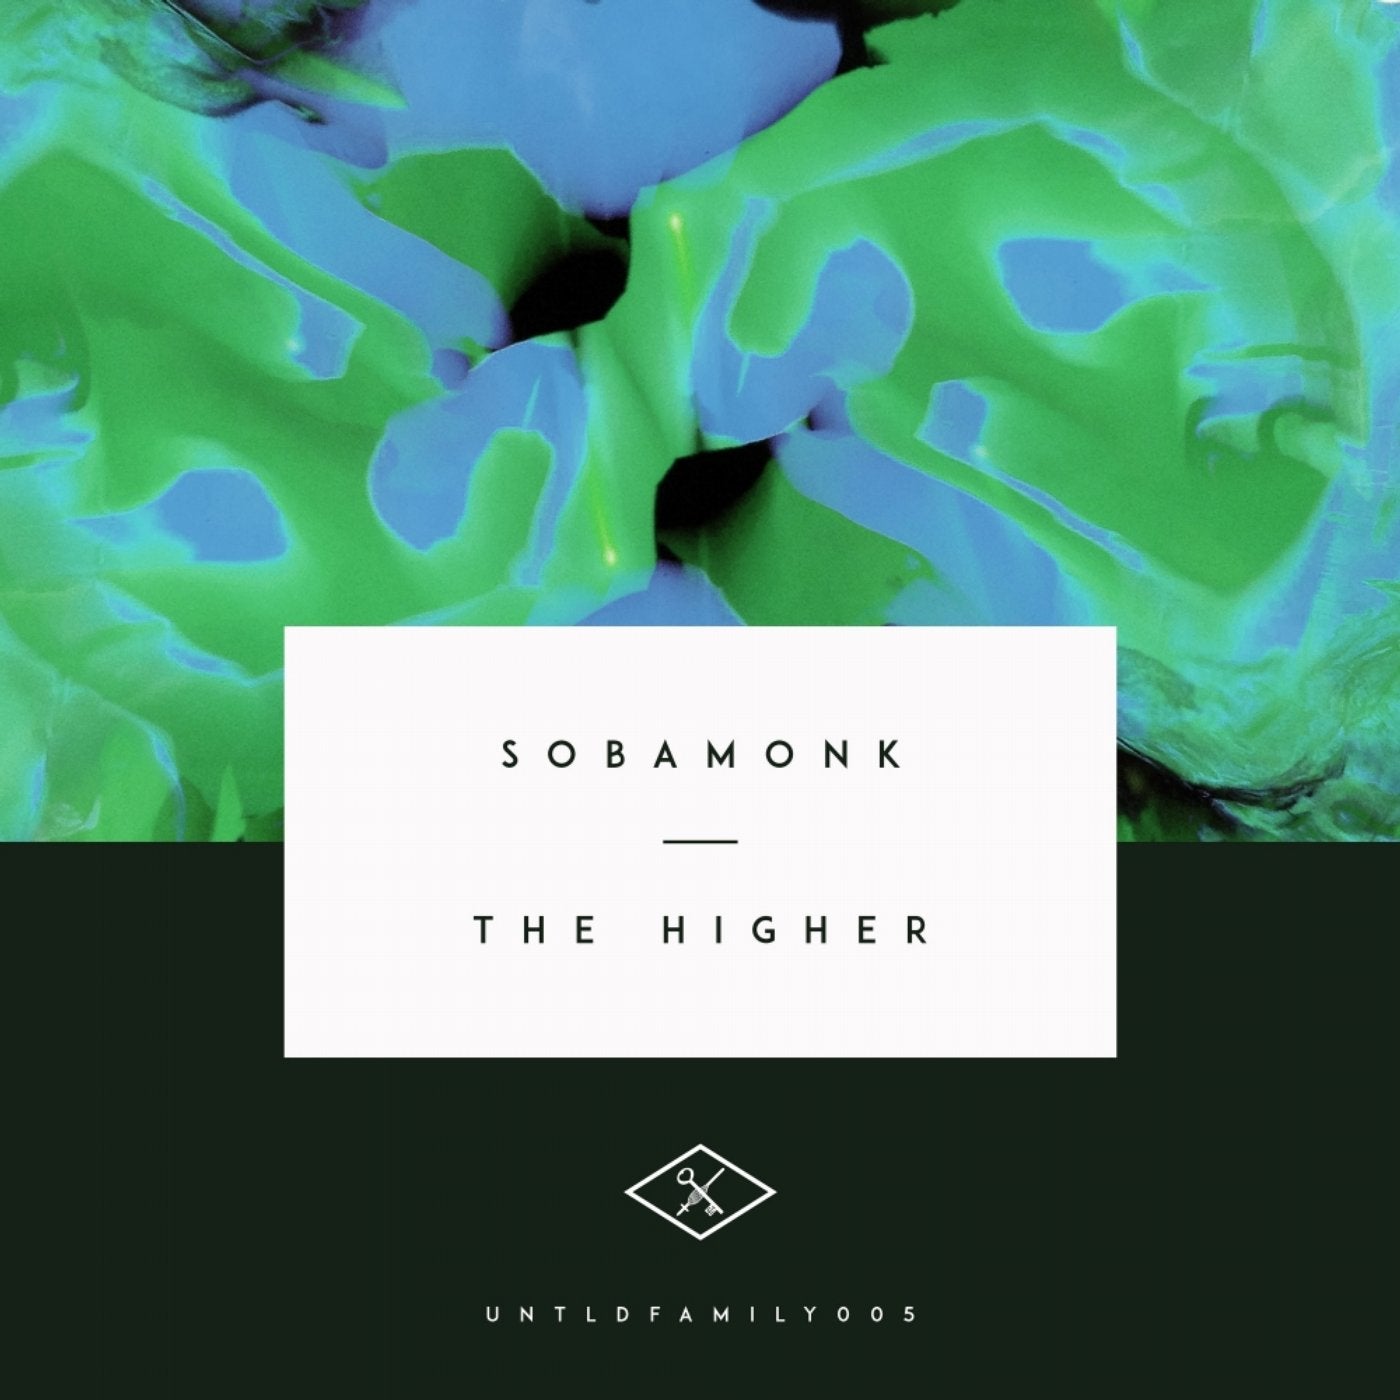 The Higher EP